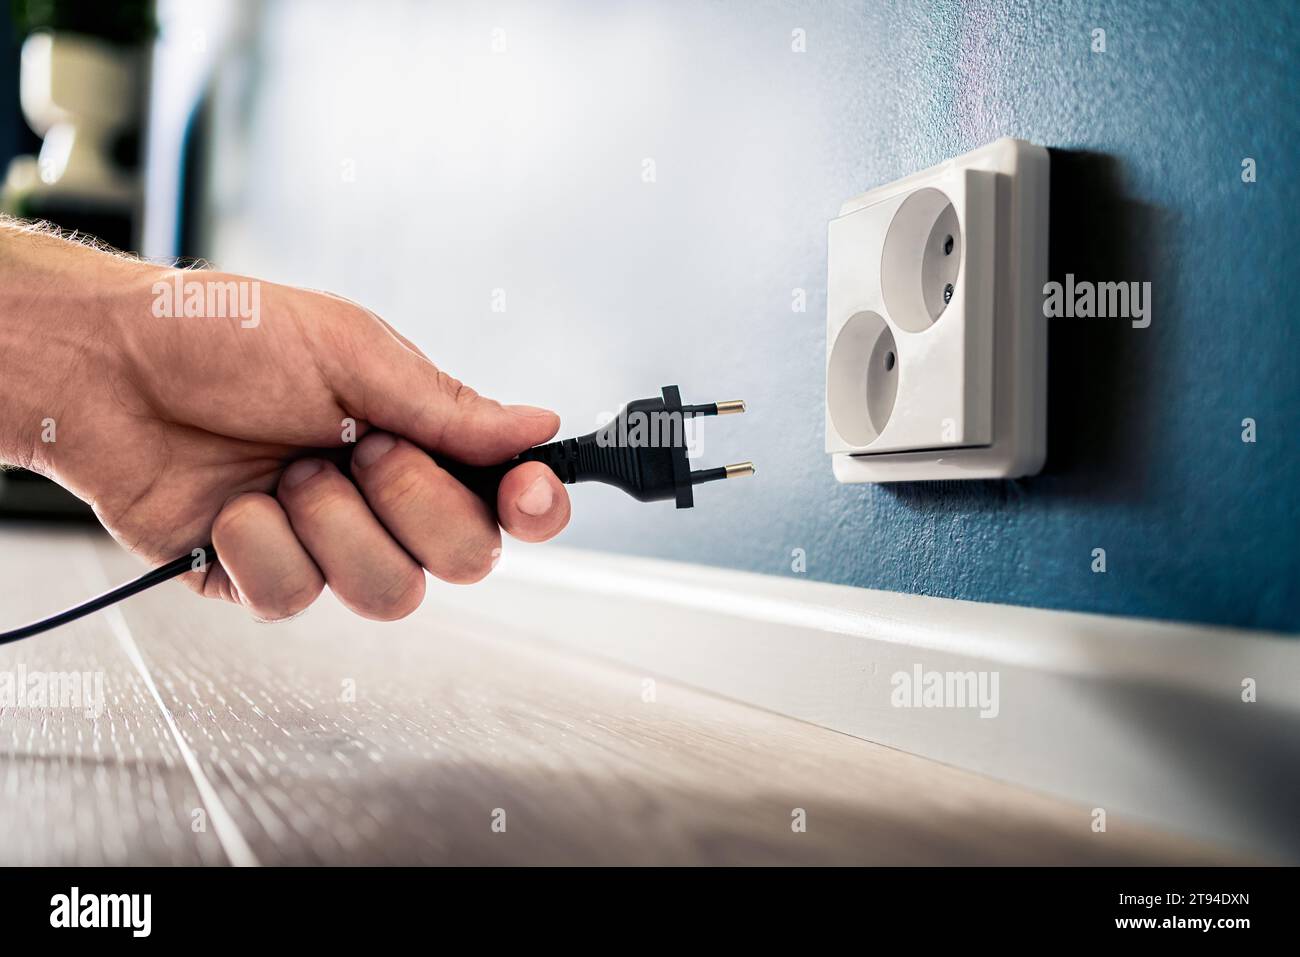 Socket, plug and electric power outlet. Man unplugging or holding cable wire cord in hand. Save energy. Electricity from home wall. Stock Photo